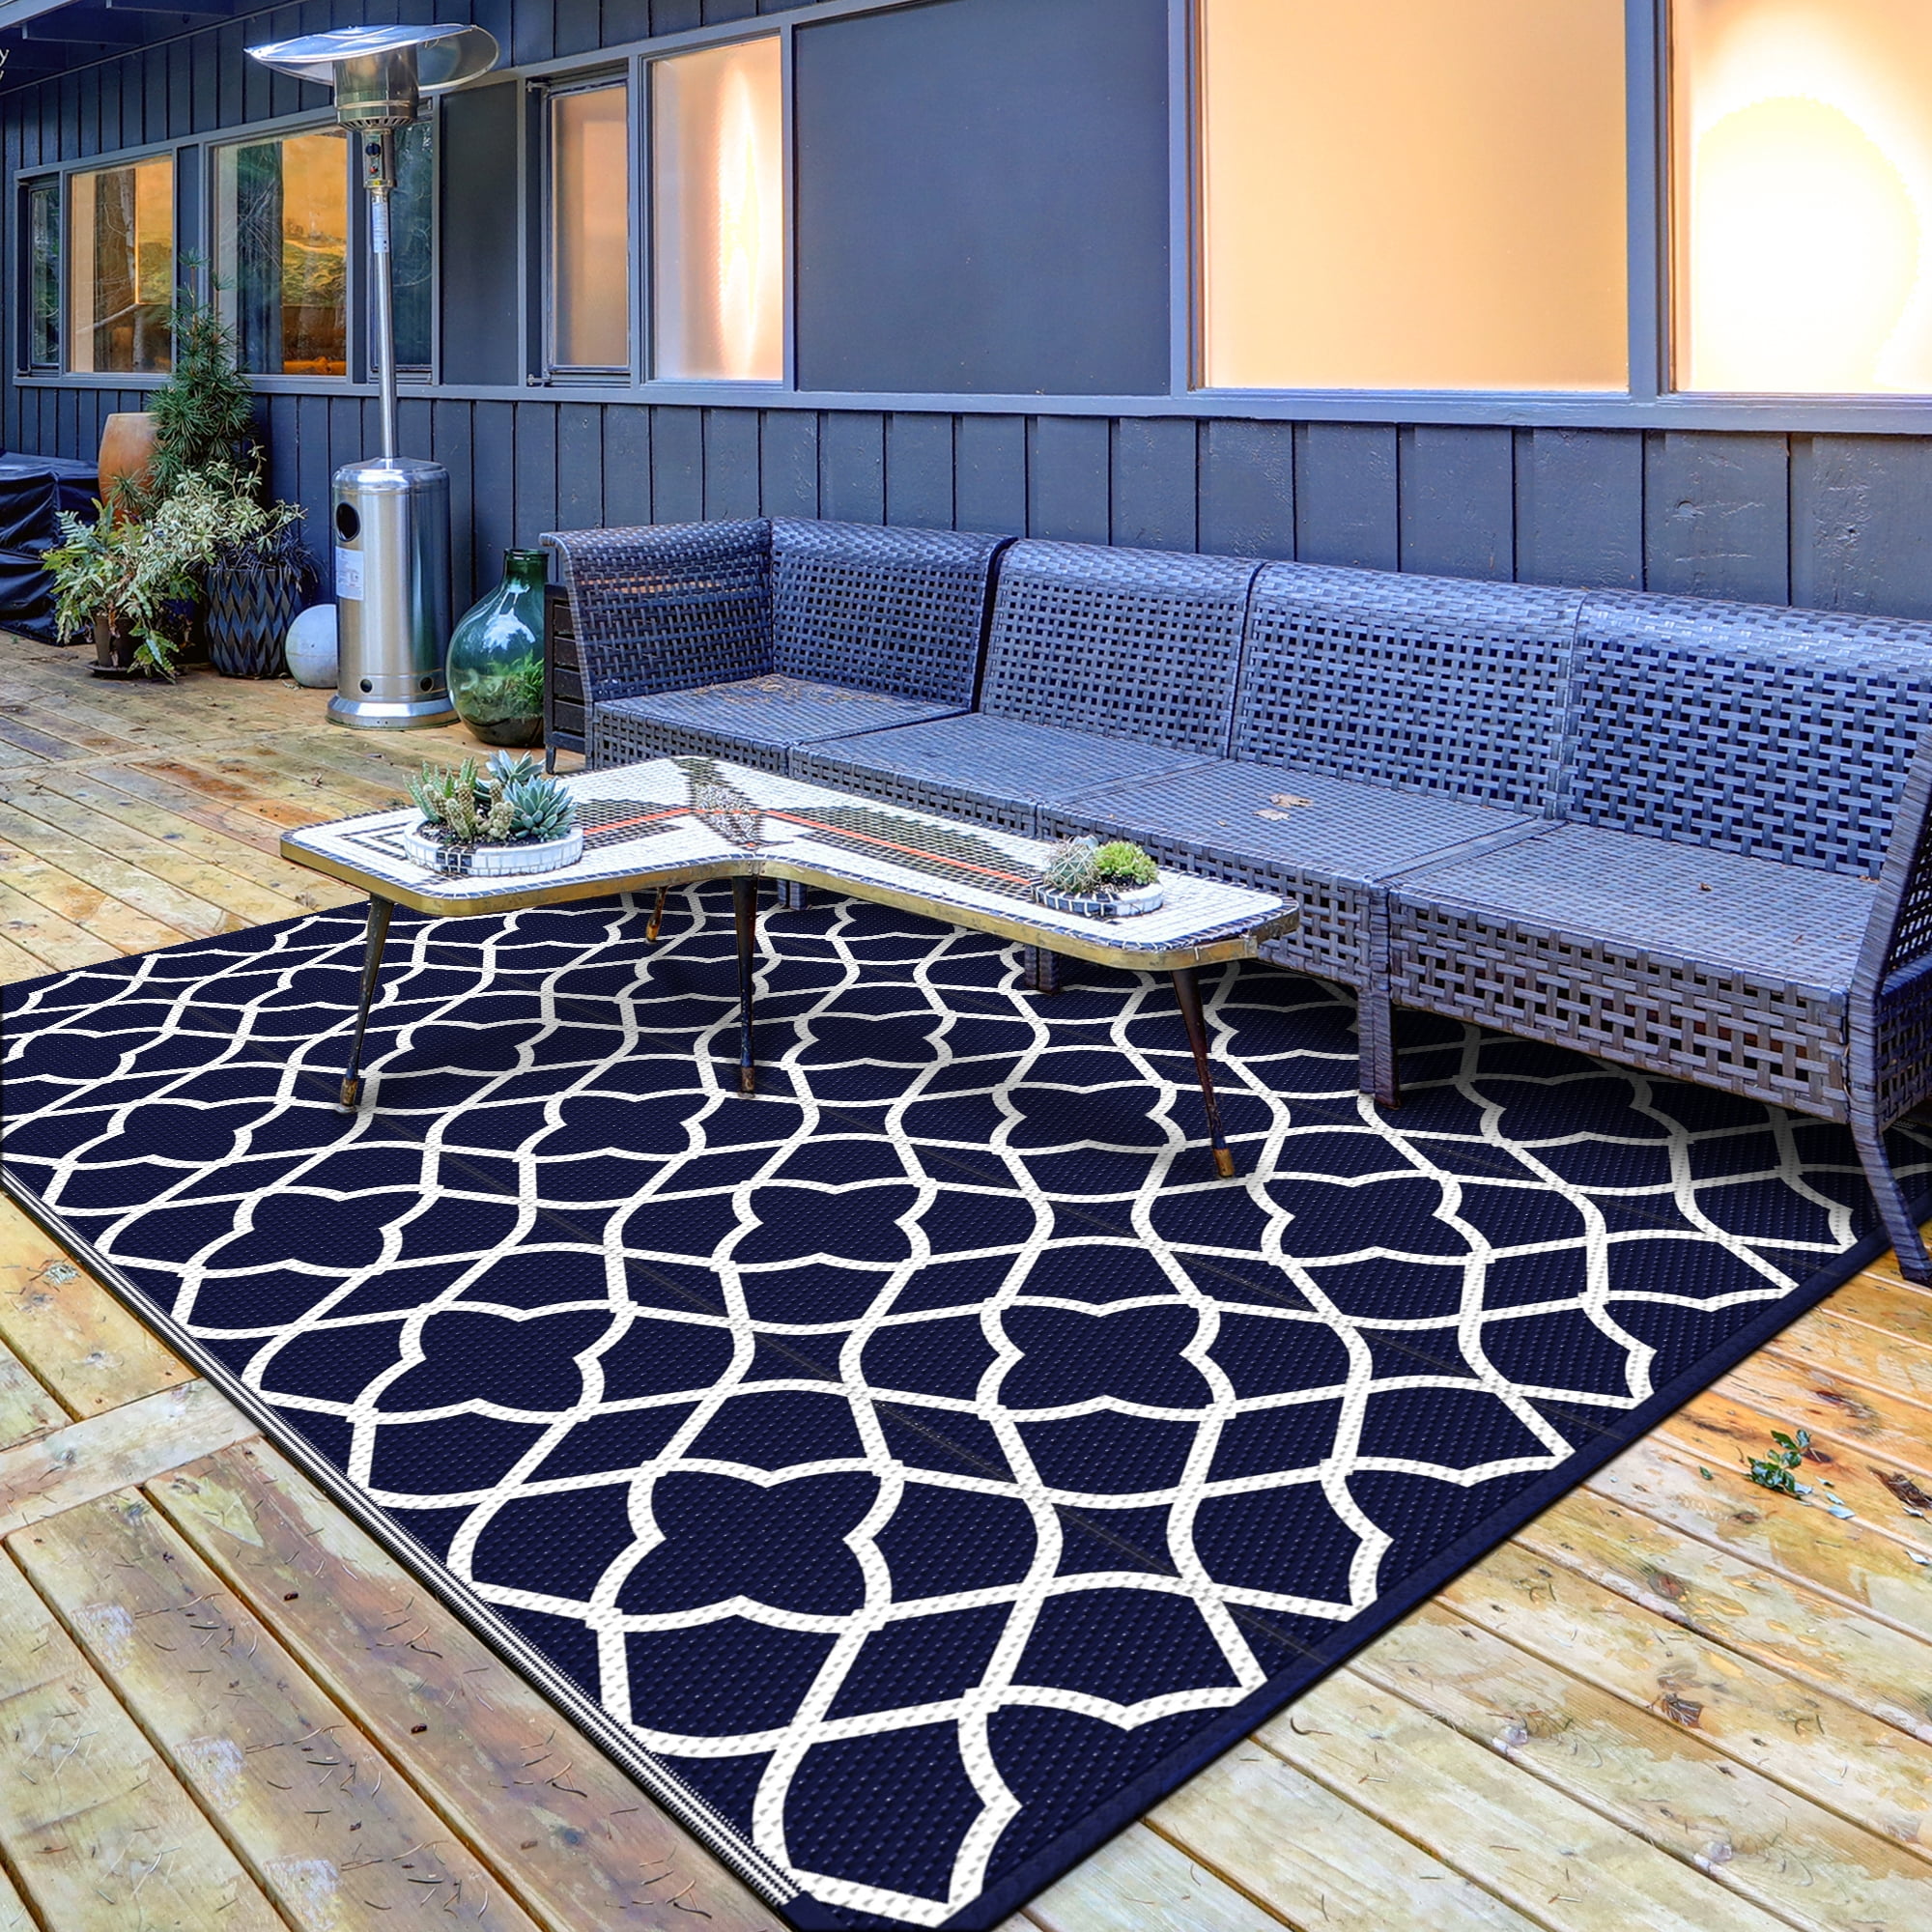 DEORAB 6'x9' Outdoor Rug for Patio Clearance,Reversible Straw Plastic  Waterproof Area Rugs,Clearance Mat,Rv,Camping,Black & Gray 